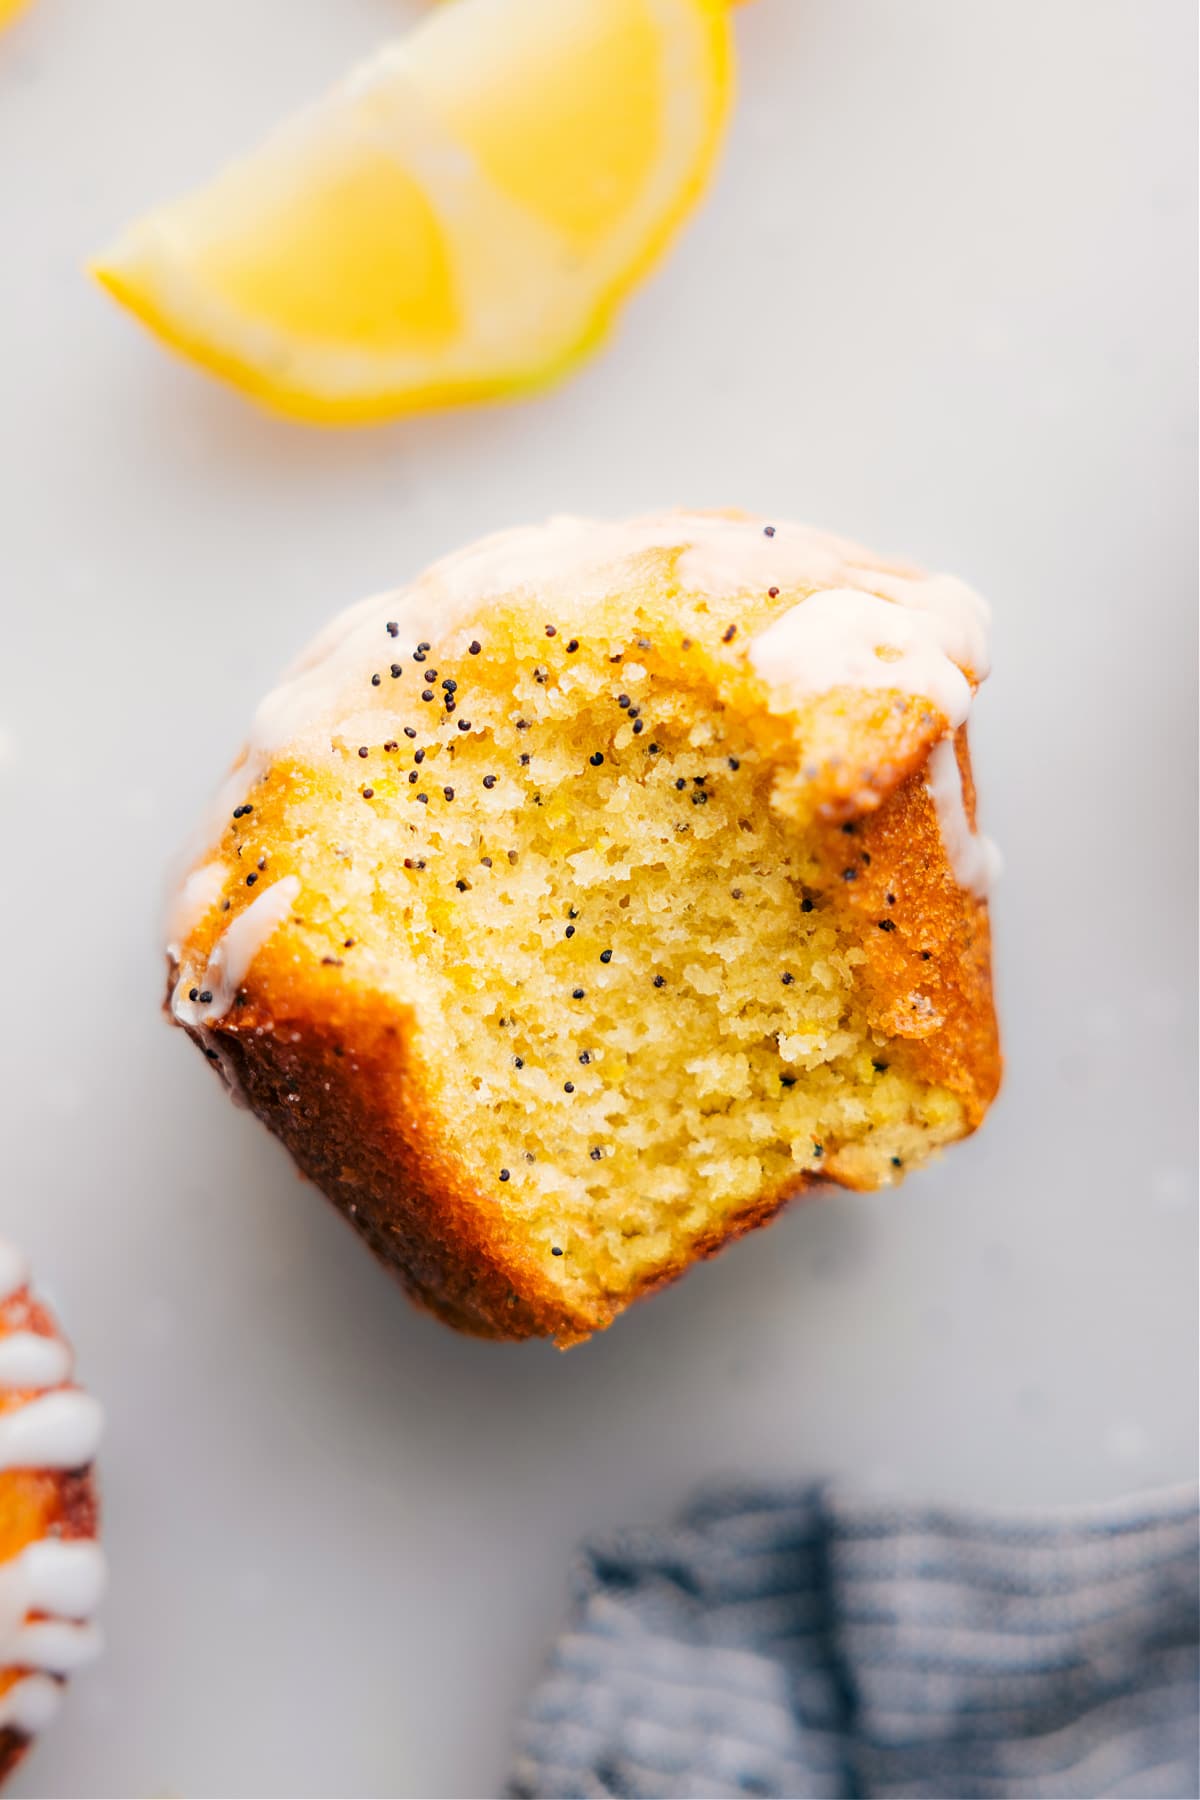 Close-up of a lemon poppy seed muffin with a fresh bite mark, revealing its moist interior, and adorned with creamy frosting.